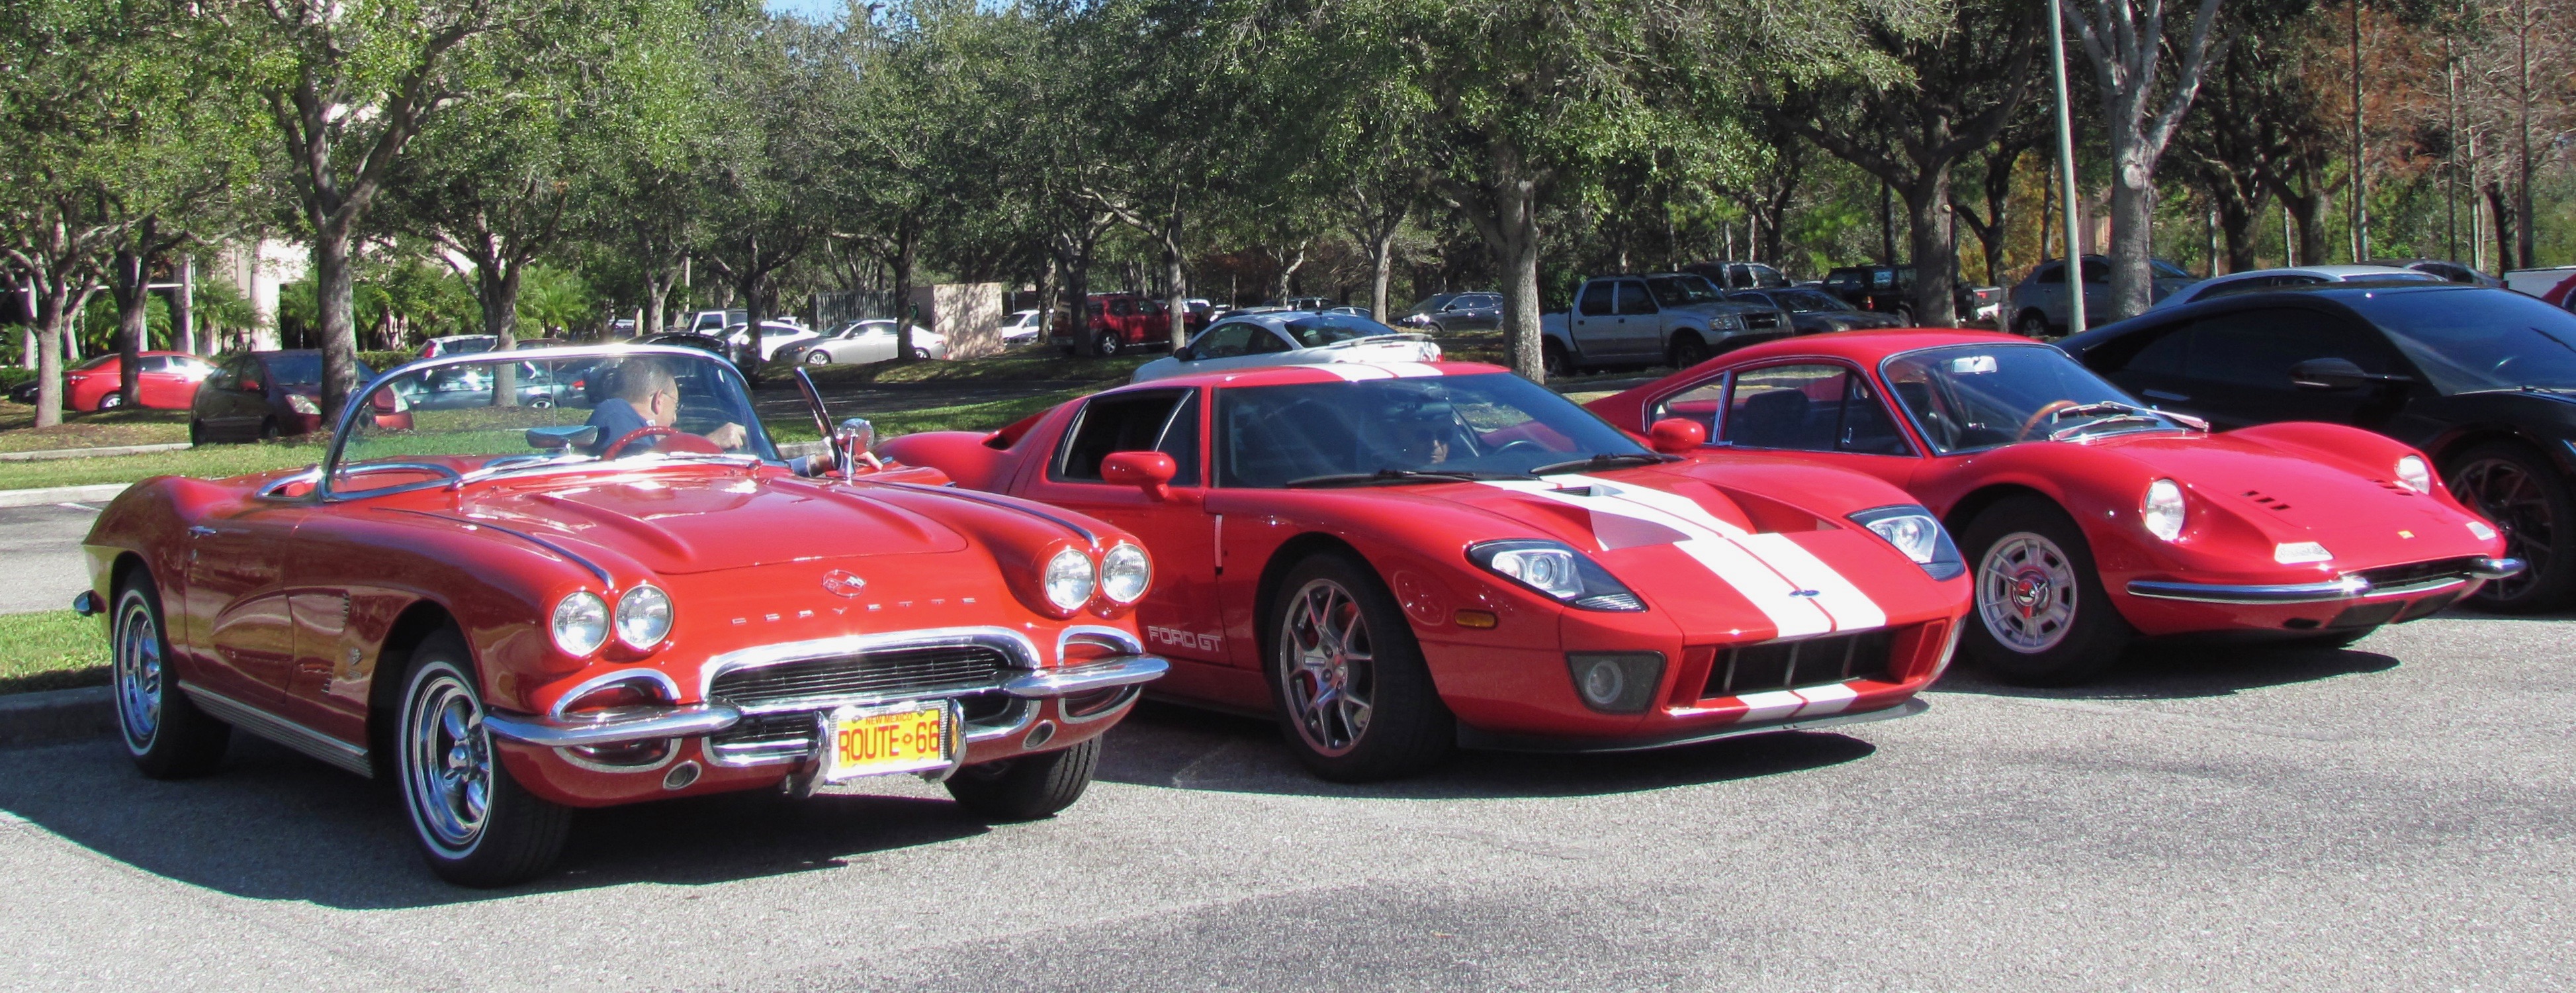 , Lunch bunch: Car guys meet to eat — and talk — in Sarasota, Florida, ClassicCars.com Journal